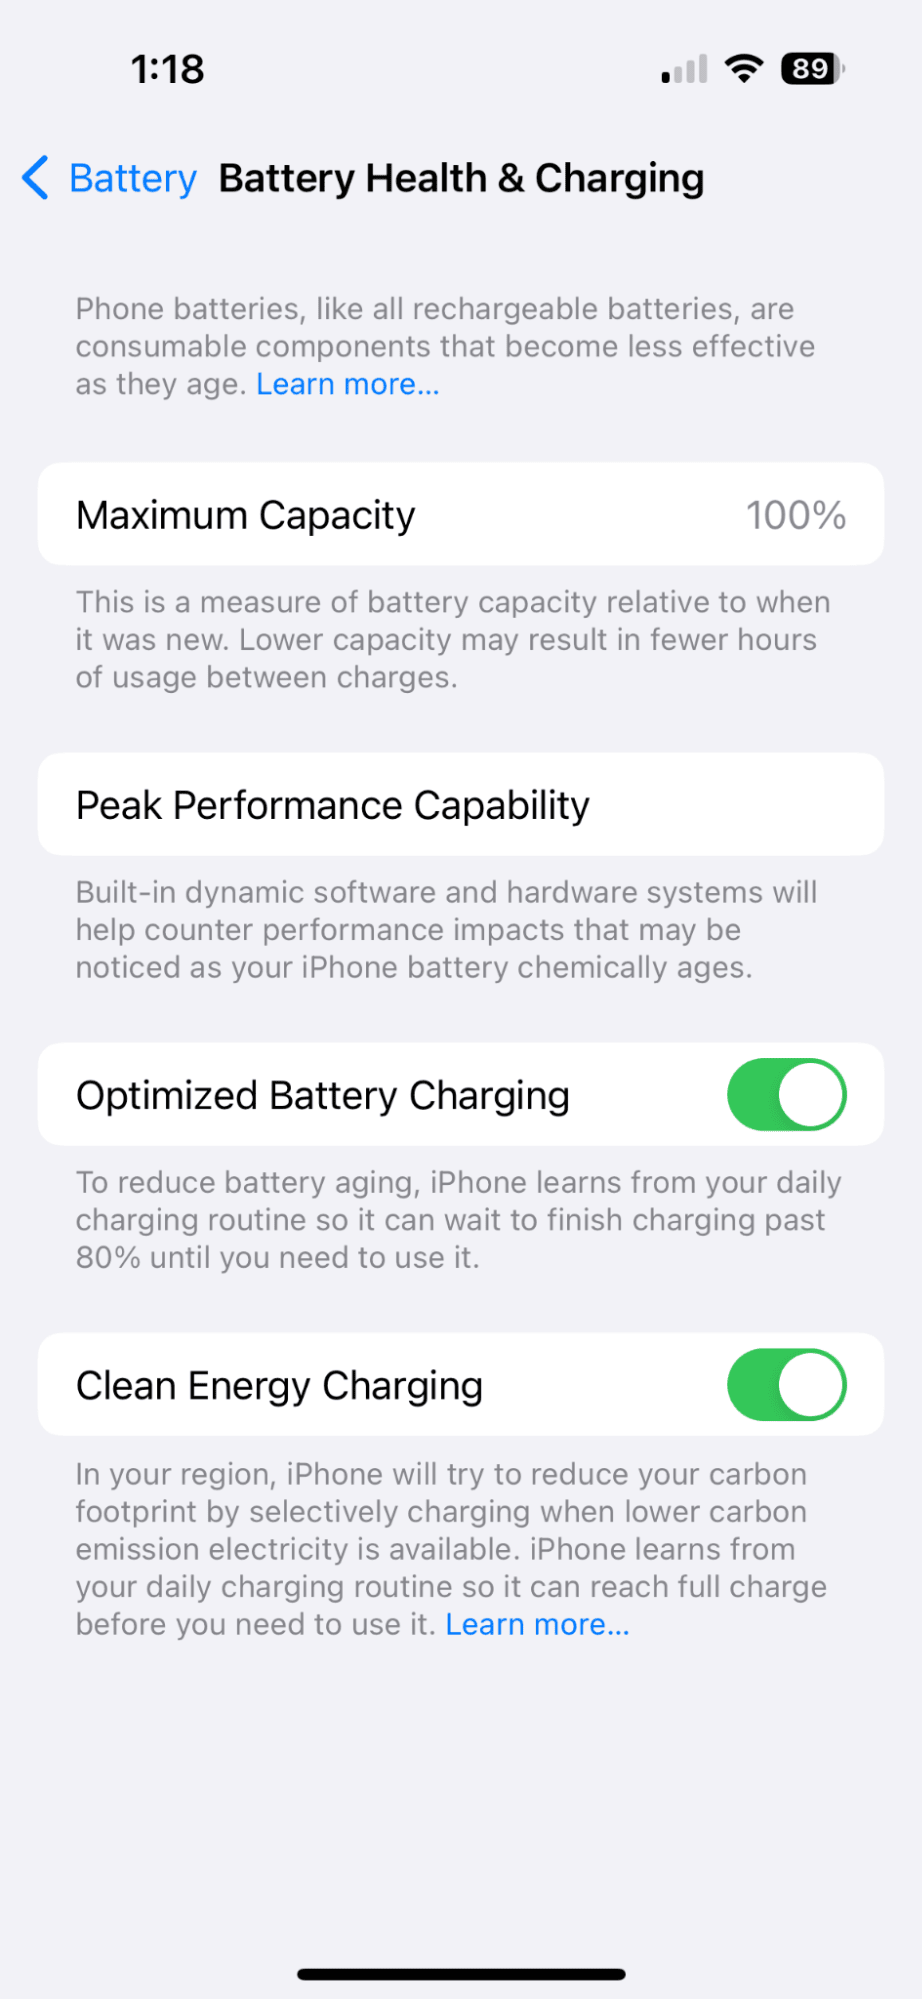 Battery Health and Charging info